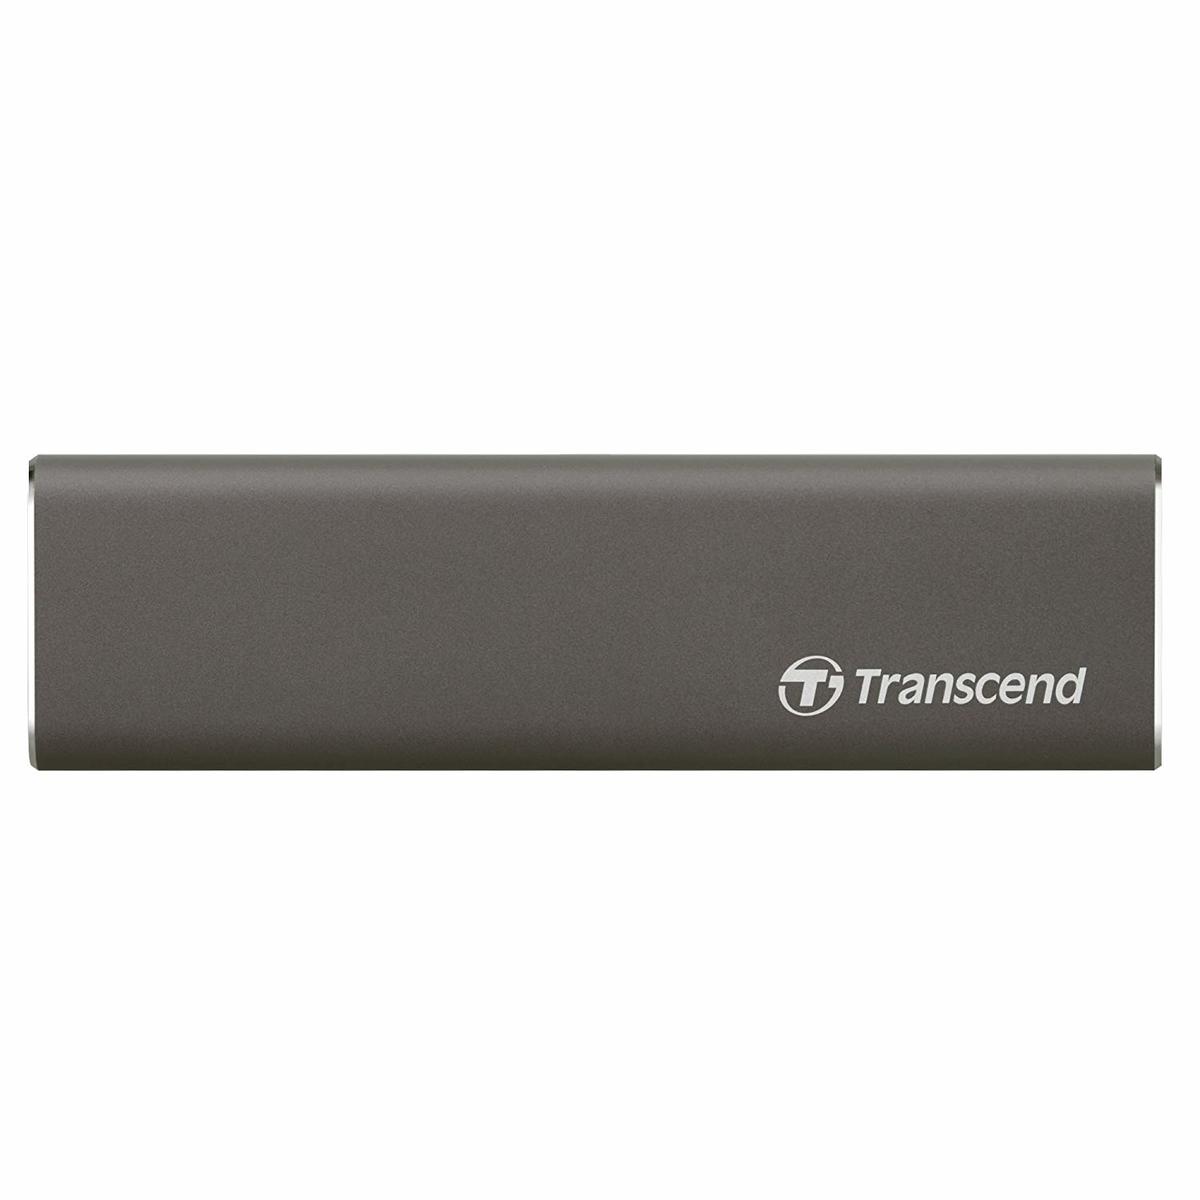 Transcned Solid State Drive TS480GSSD600 480GB